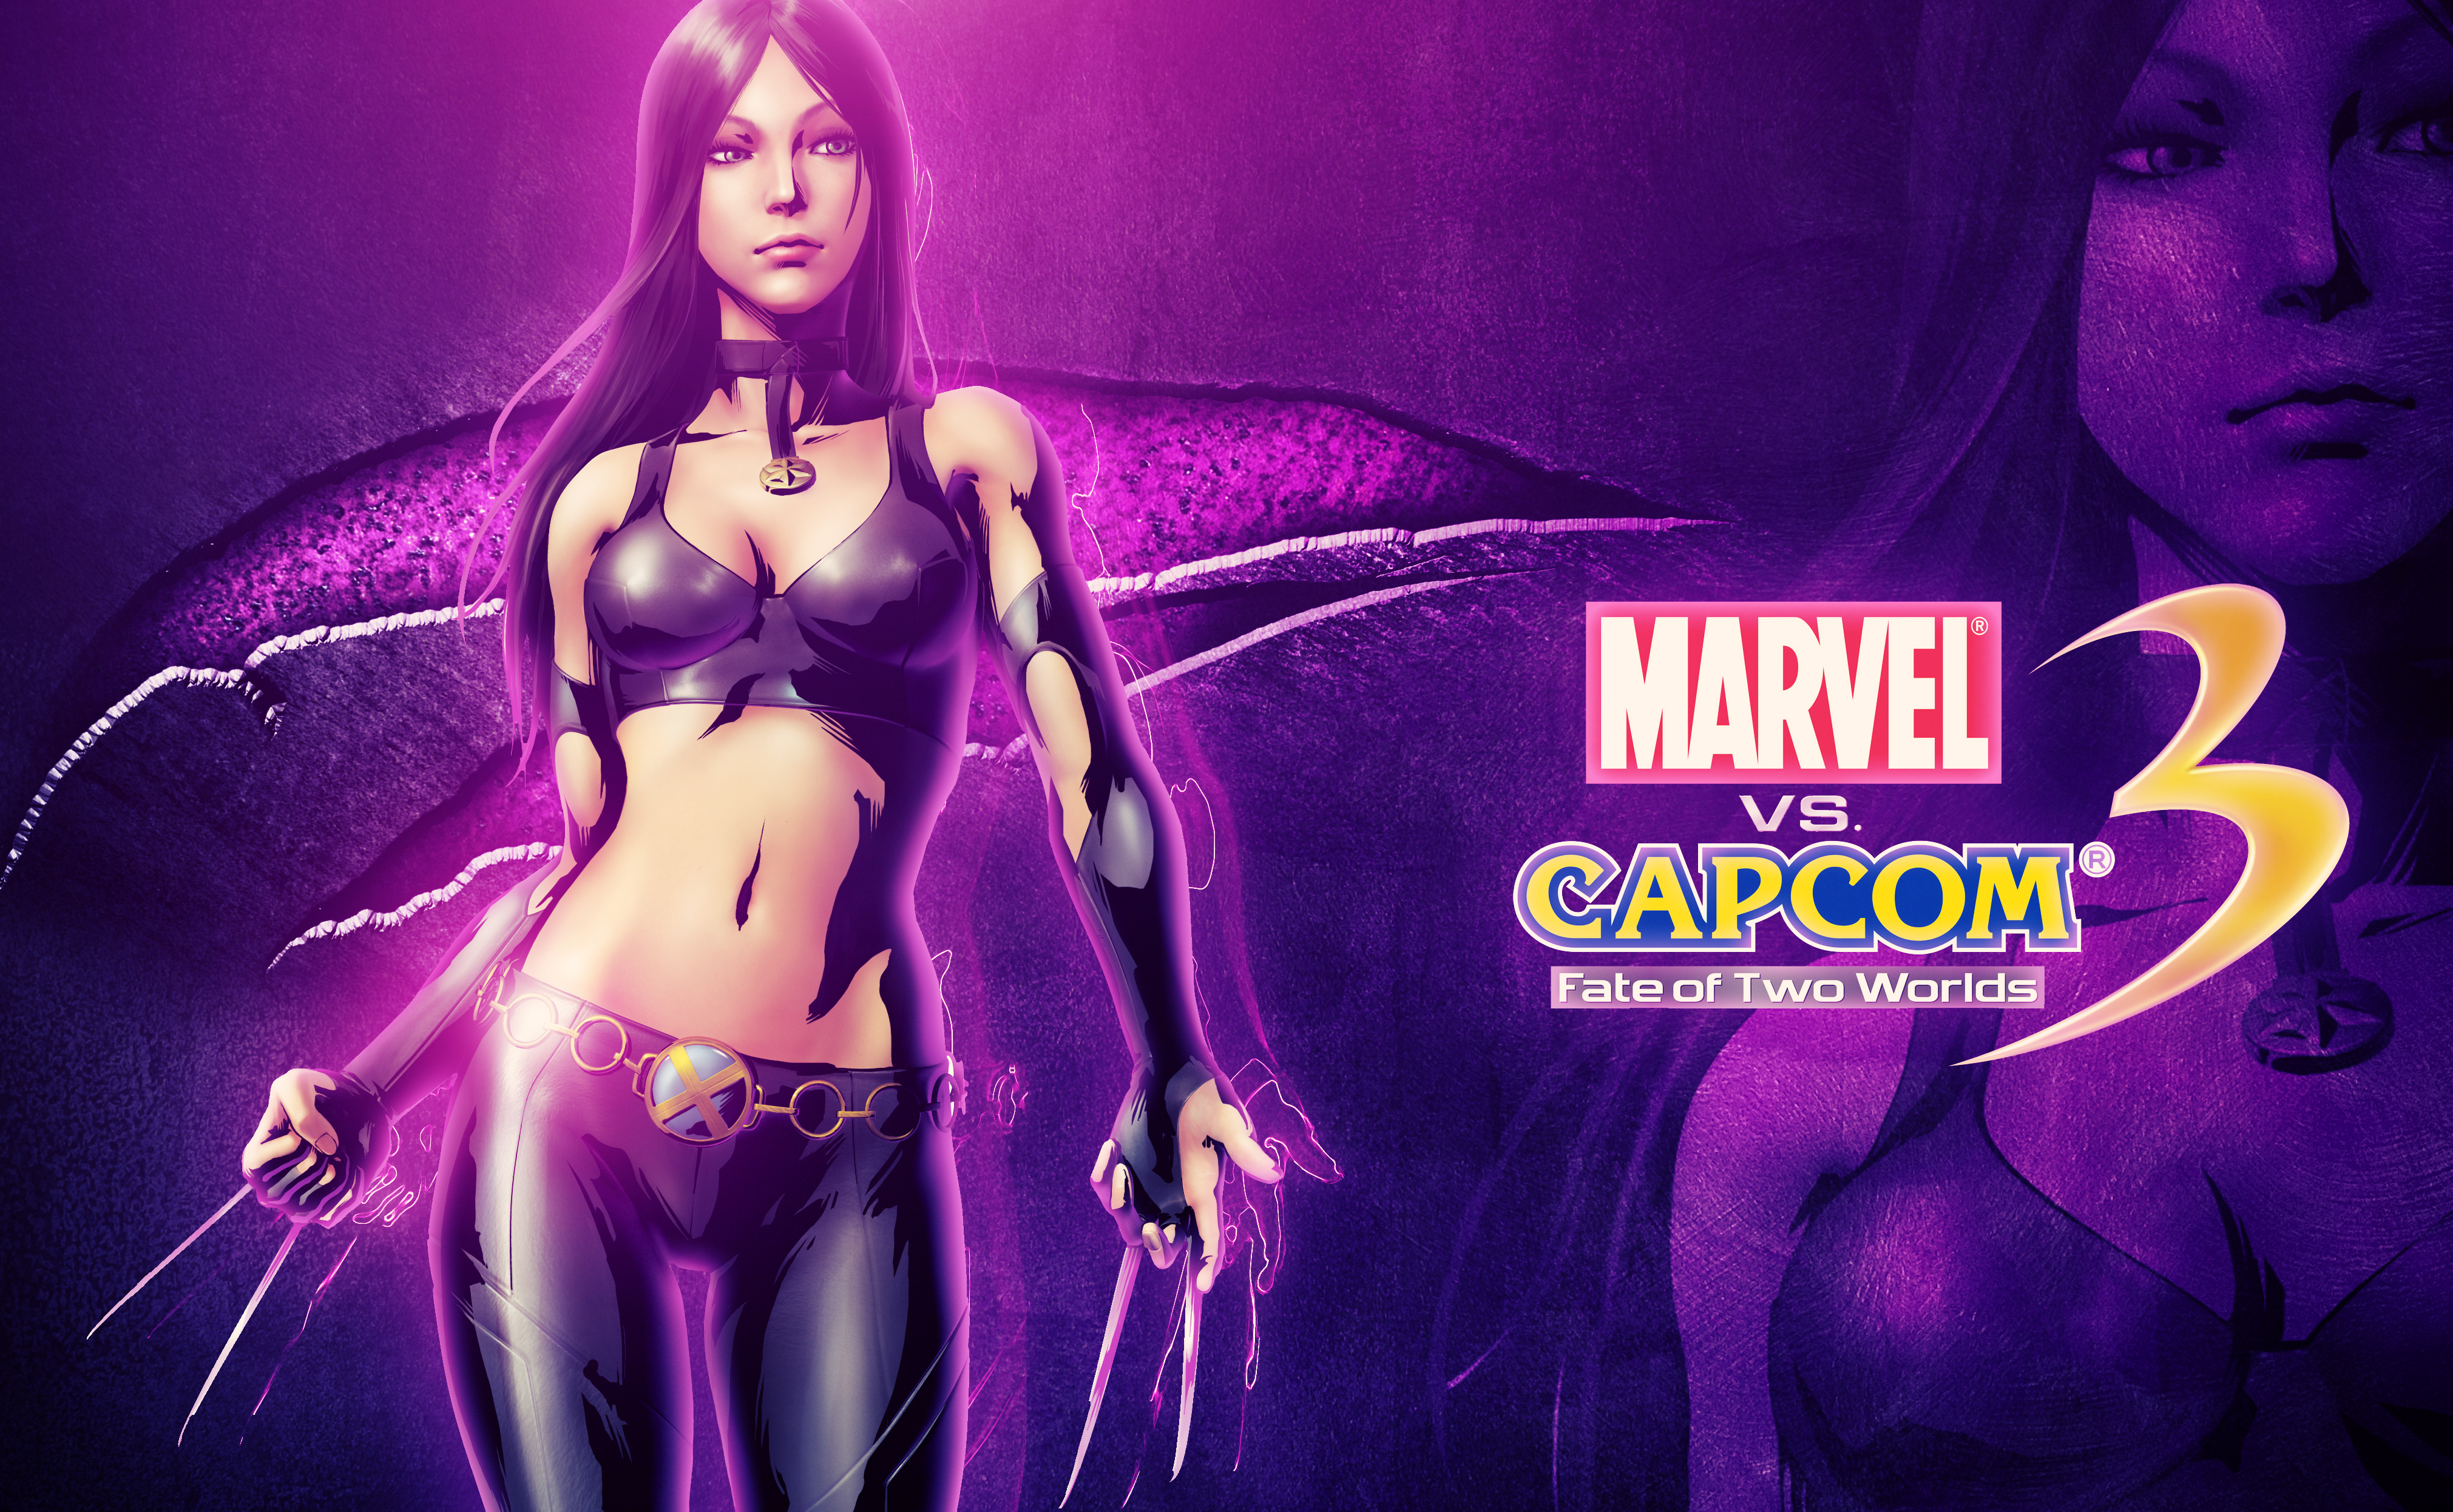 video game, marvel vs capcom 3: fate of two worlds, x 23